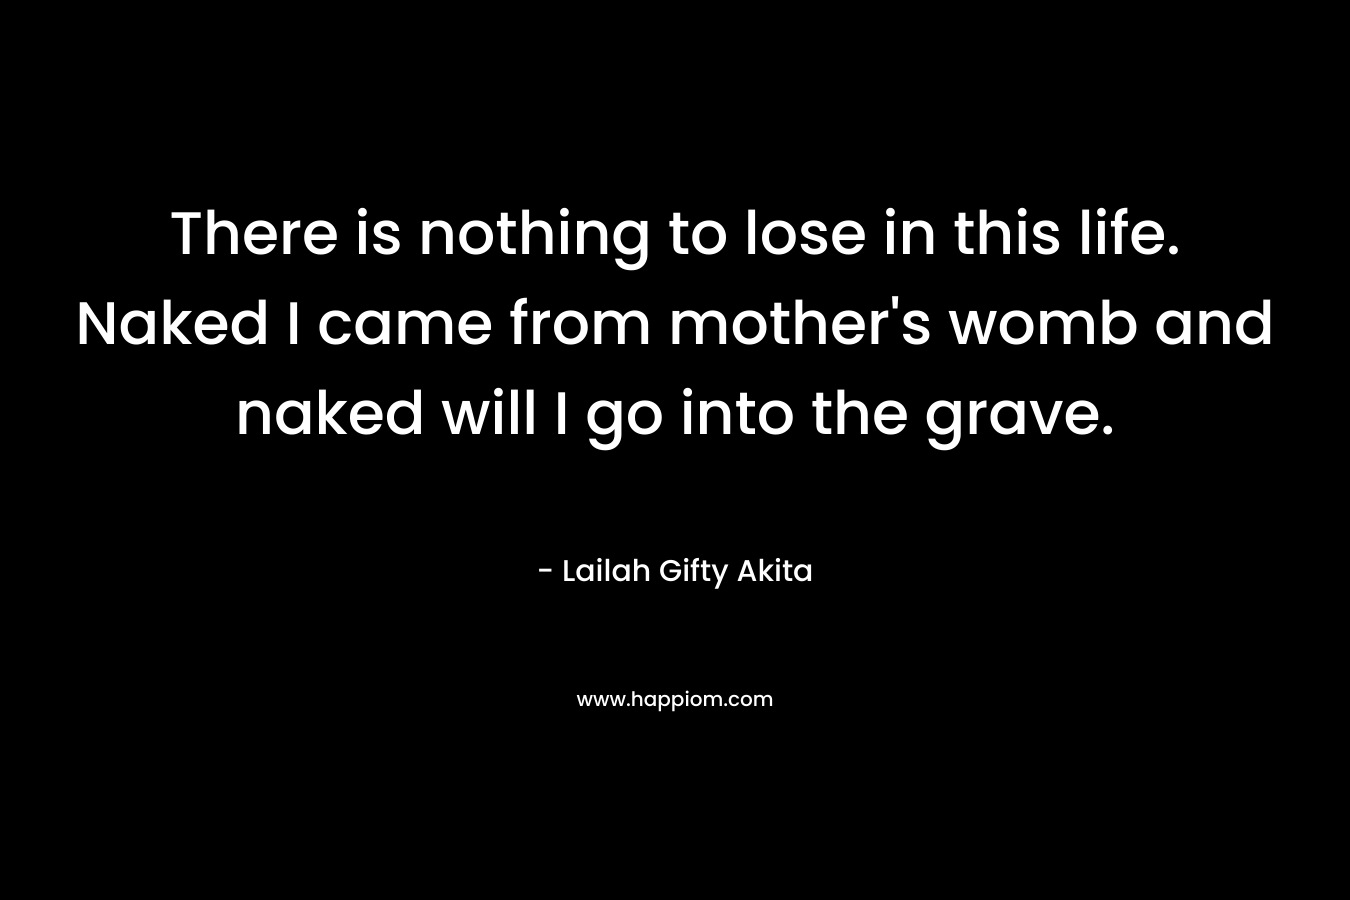 There is nothing to lose in this life. Naked I came from mother's womb and naked will I go into the grave.